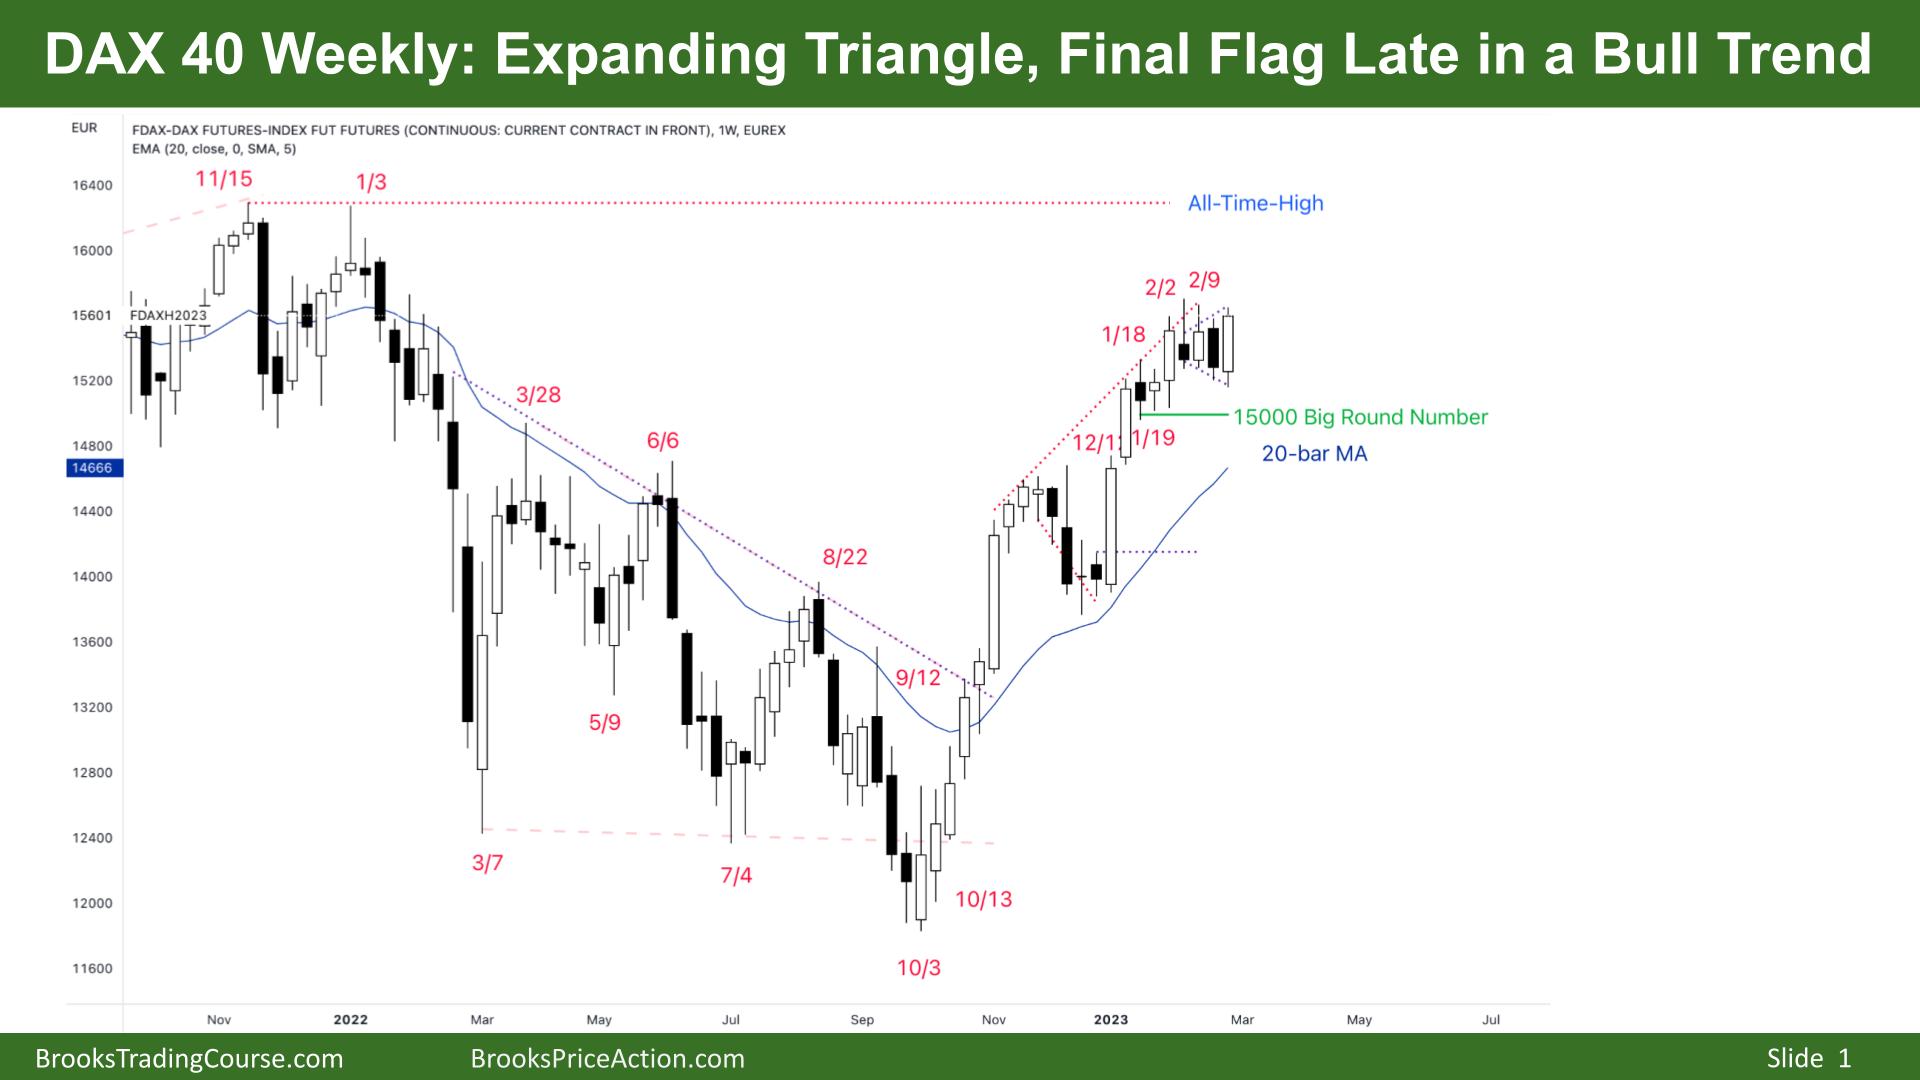 DAX 40 Expanding Triangle, Final Flag Late in a Bull Trend